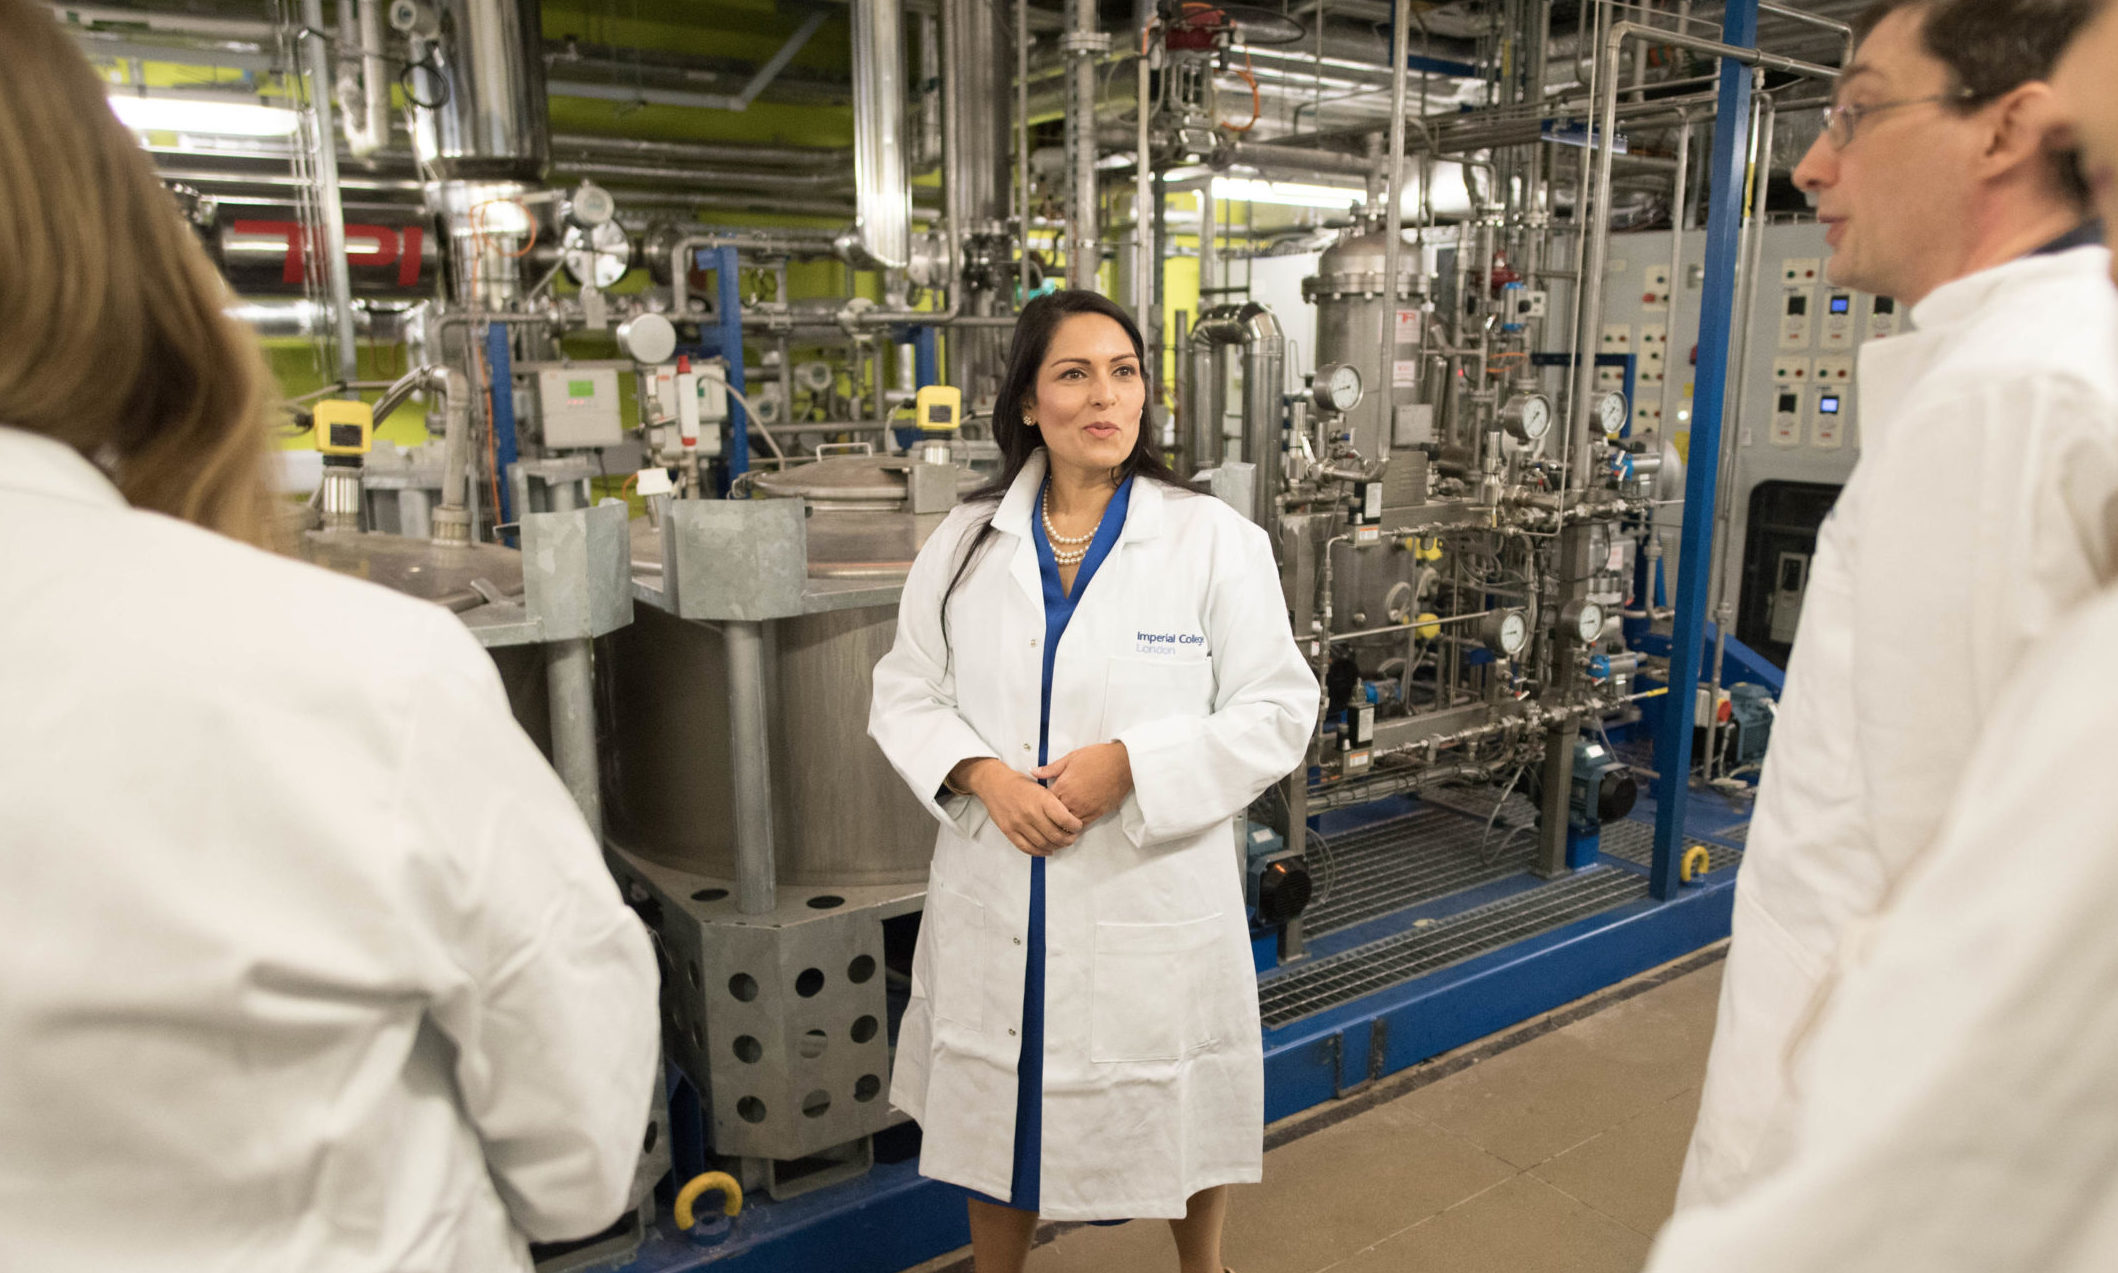 Home Secretary Priti Patel meets students and staff working on 'carbon capture' at Imperial College London in South Kensington, London, as she announces plans for a new points-based immigration system.